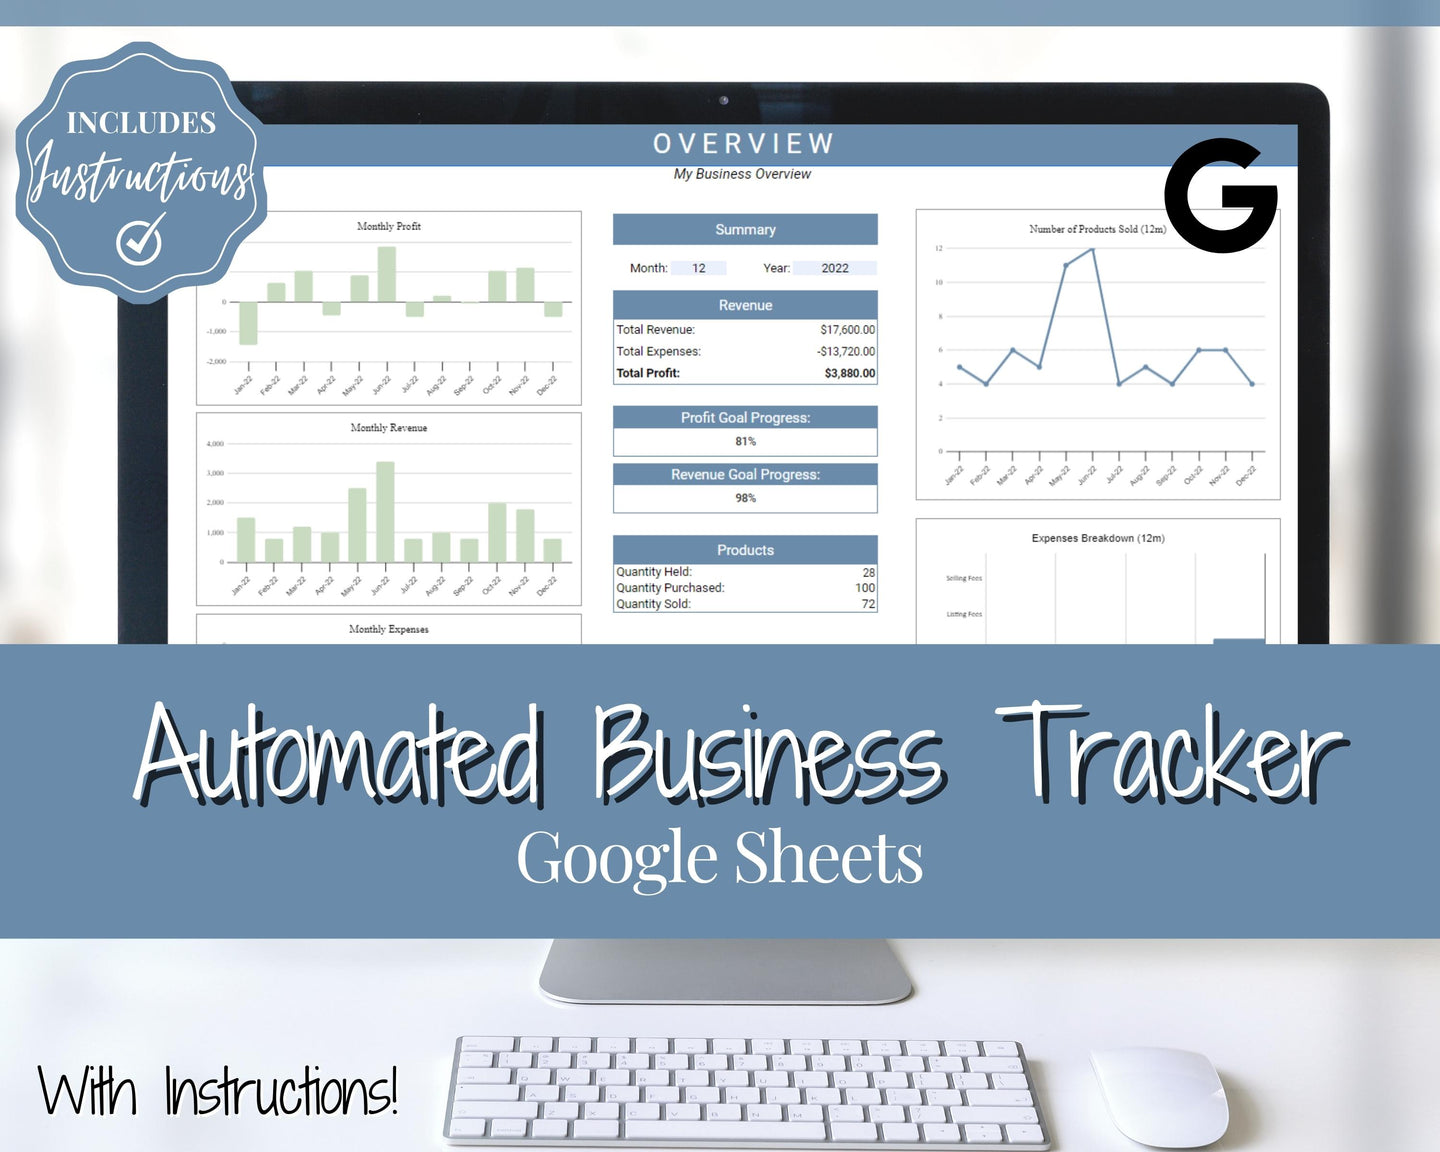 Small Business Bookkeeping Spreadsheet | Google Sheets Automated Business Expense Tracker & Product Invetory Tracker | Blue